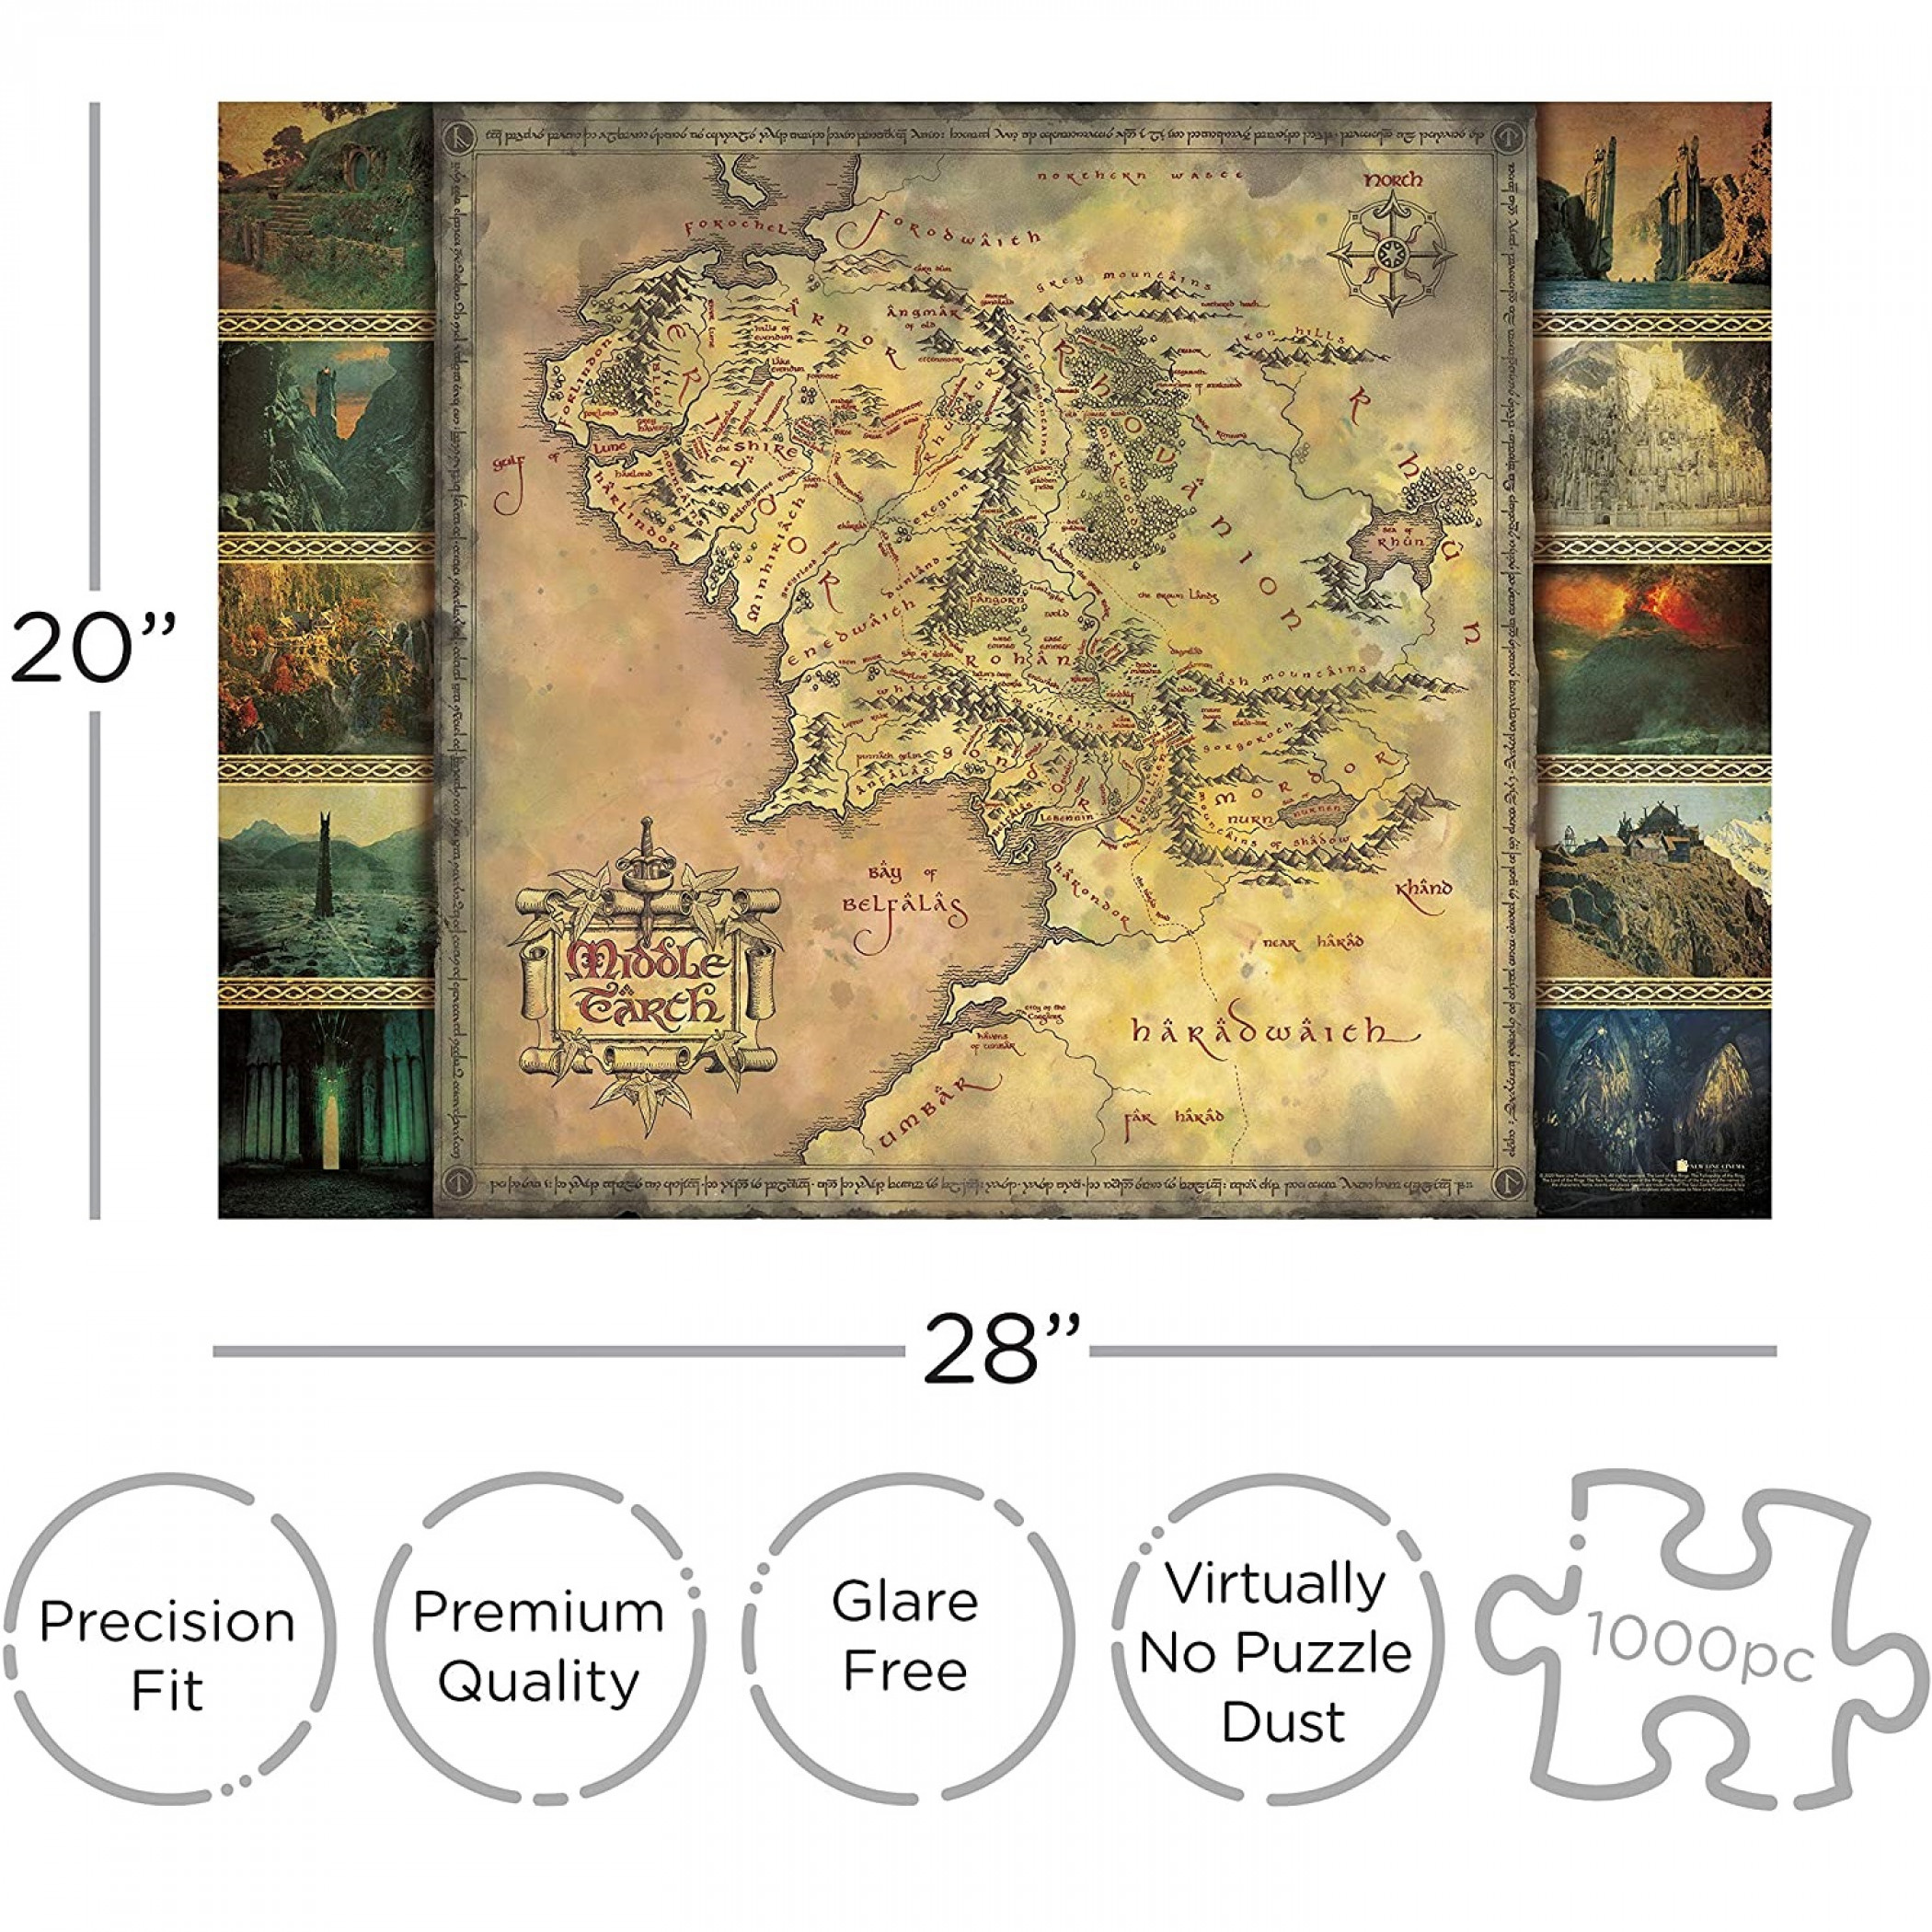 Lord of the Rings Middle Earth Map 1000 Piece Jigsaw Puzzle